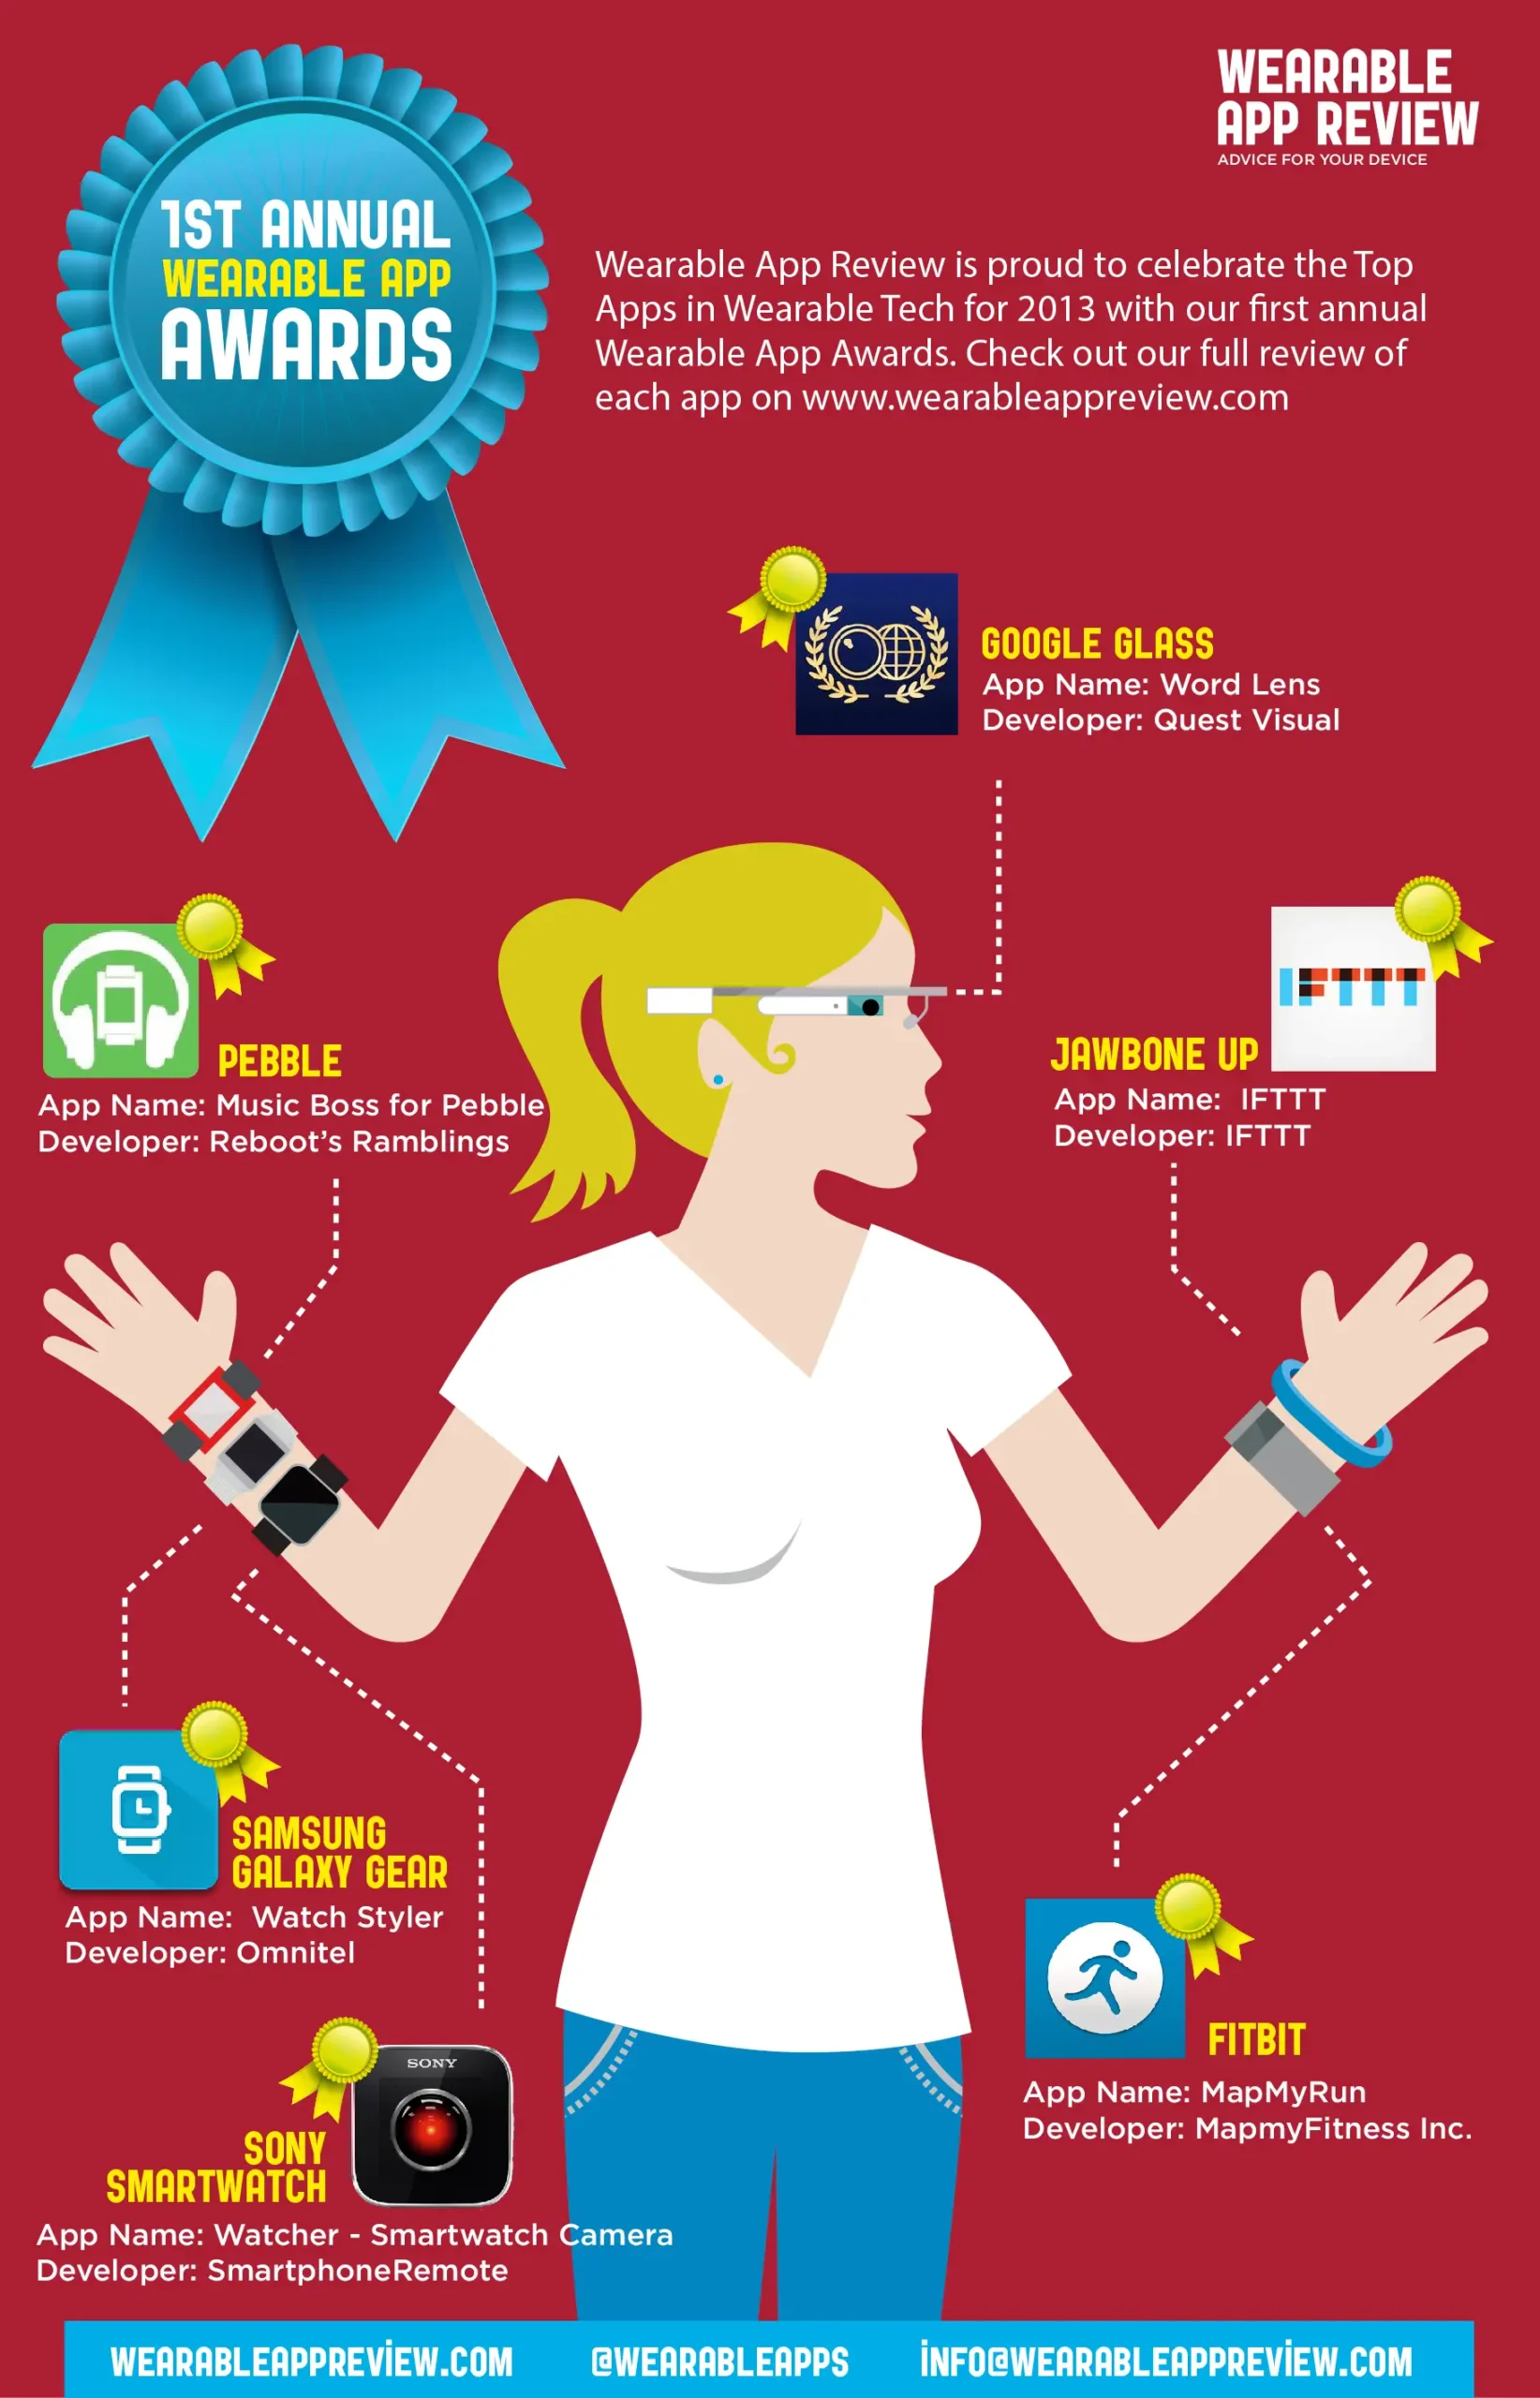 2013 Wearable App Awards Results
